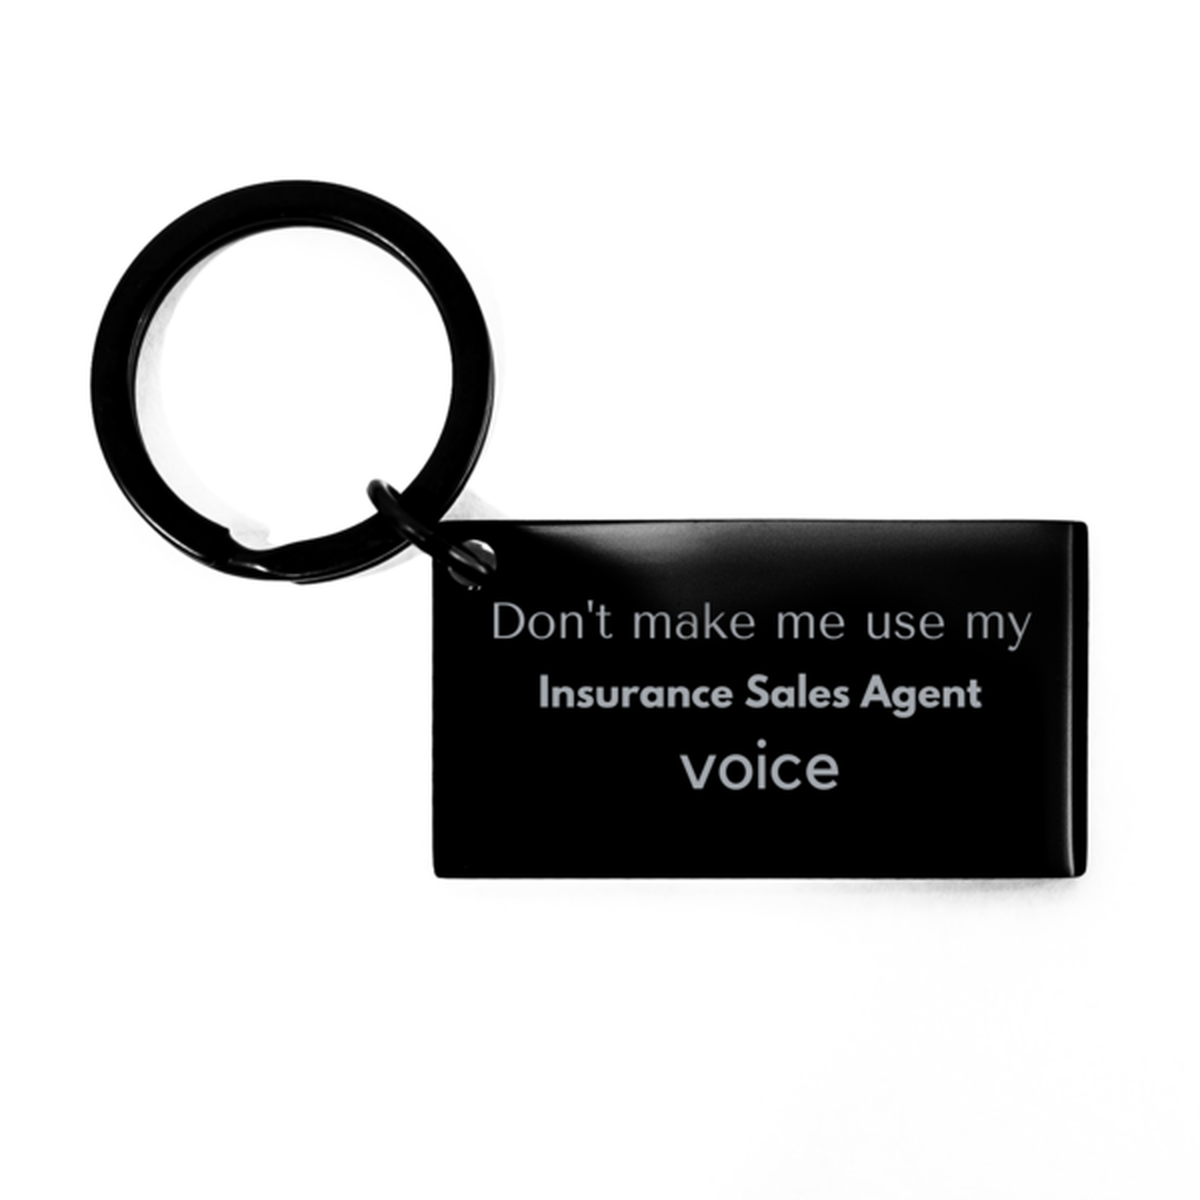 Don't make me use my Insurance Sales Agent voice, Sarcasm Insurance Sales Agent Gifts, Christmas Insurance Sales Agent Keychain Birthday Unique Gifts For Insurance Sales Agent Coworkers, Men, Women, Colleague, Friends